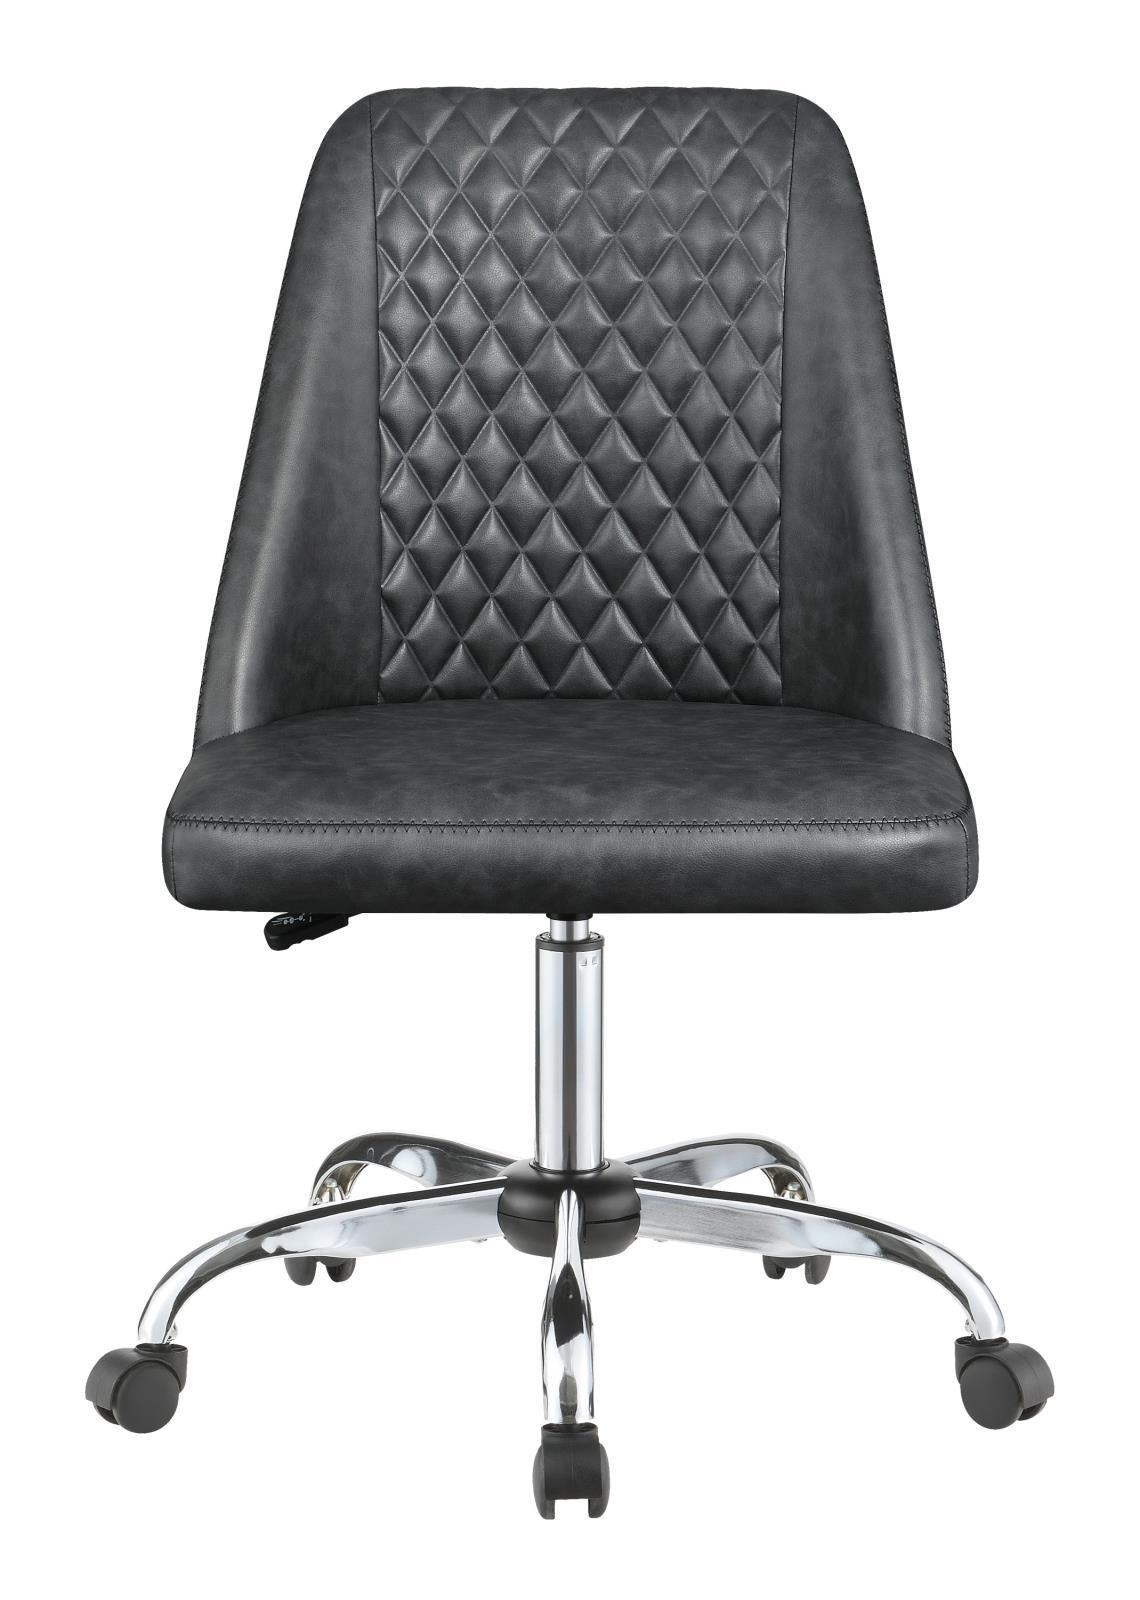 Althea Upholstered Tufted Back Office Chair Grey and Chrome  Half Price Furniture